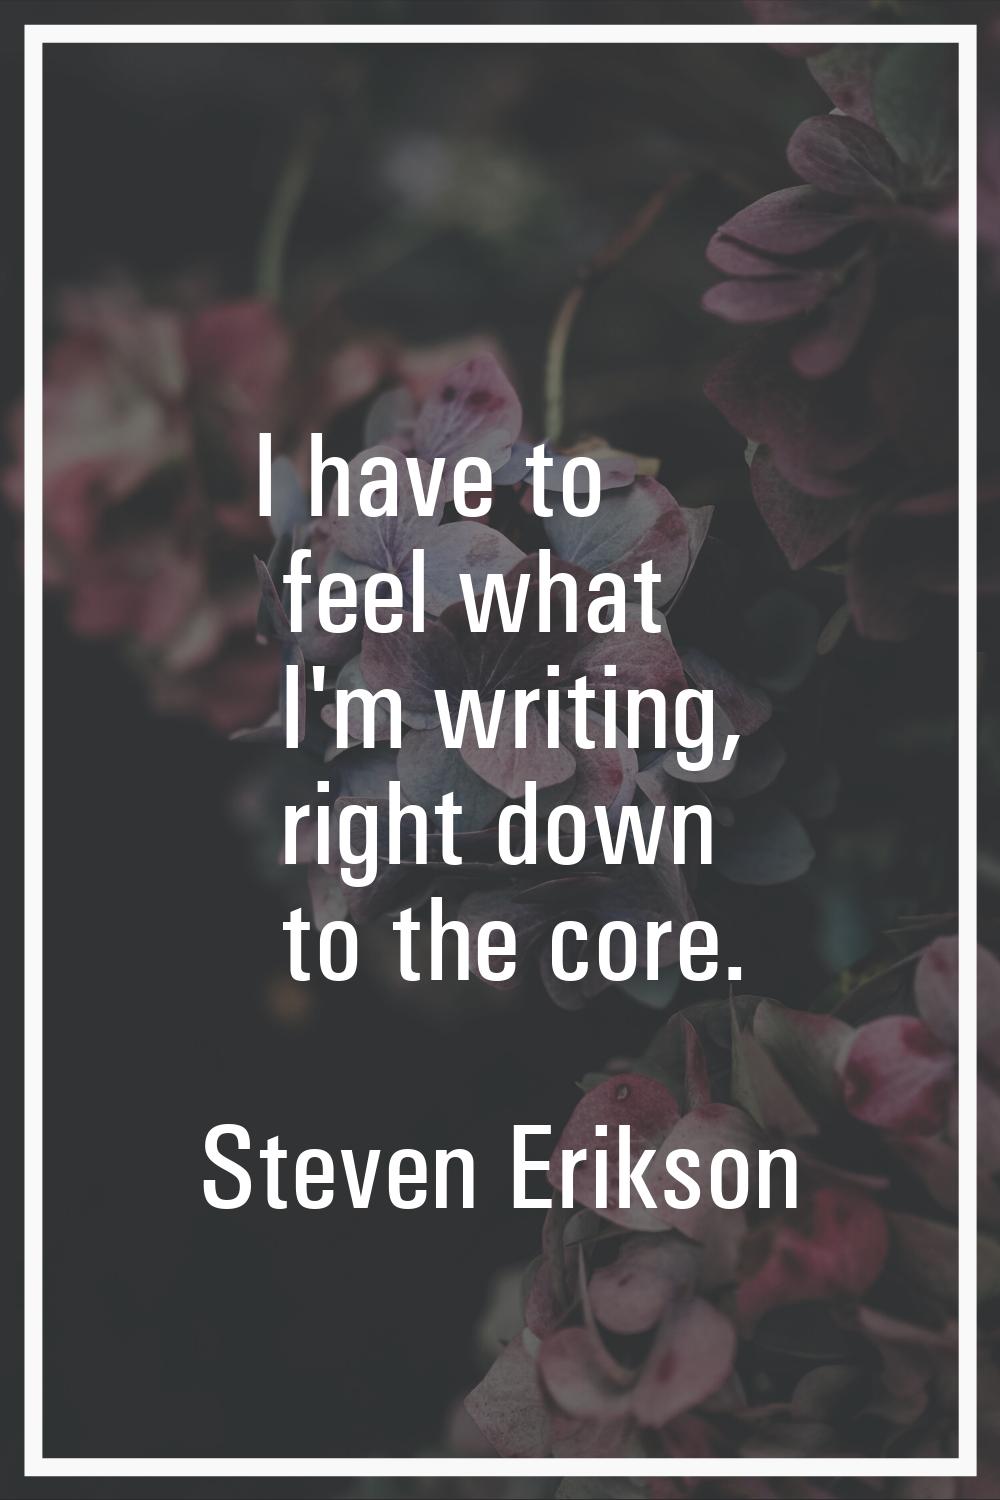 I have to feel what I'm writing, right down to the core.